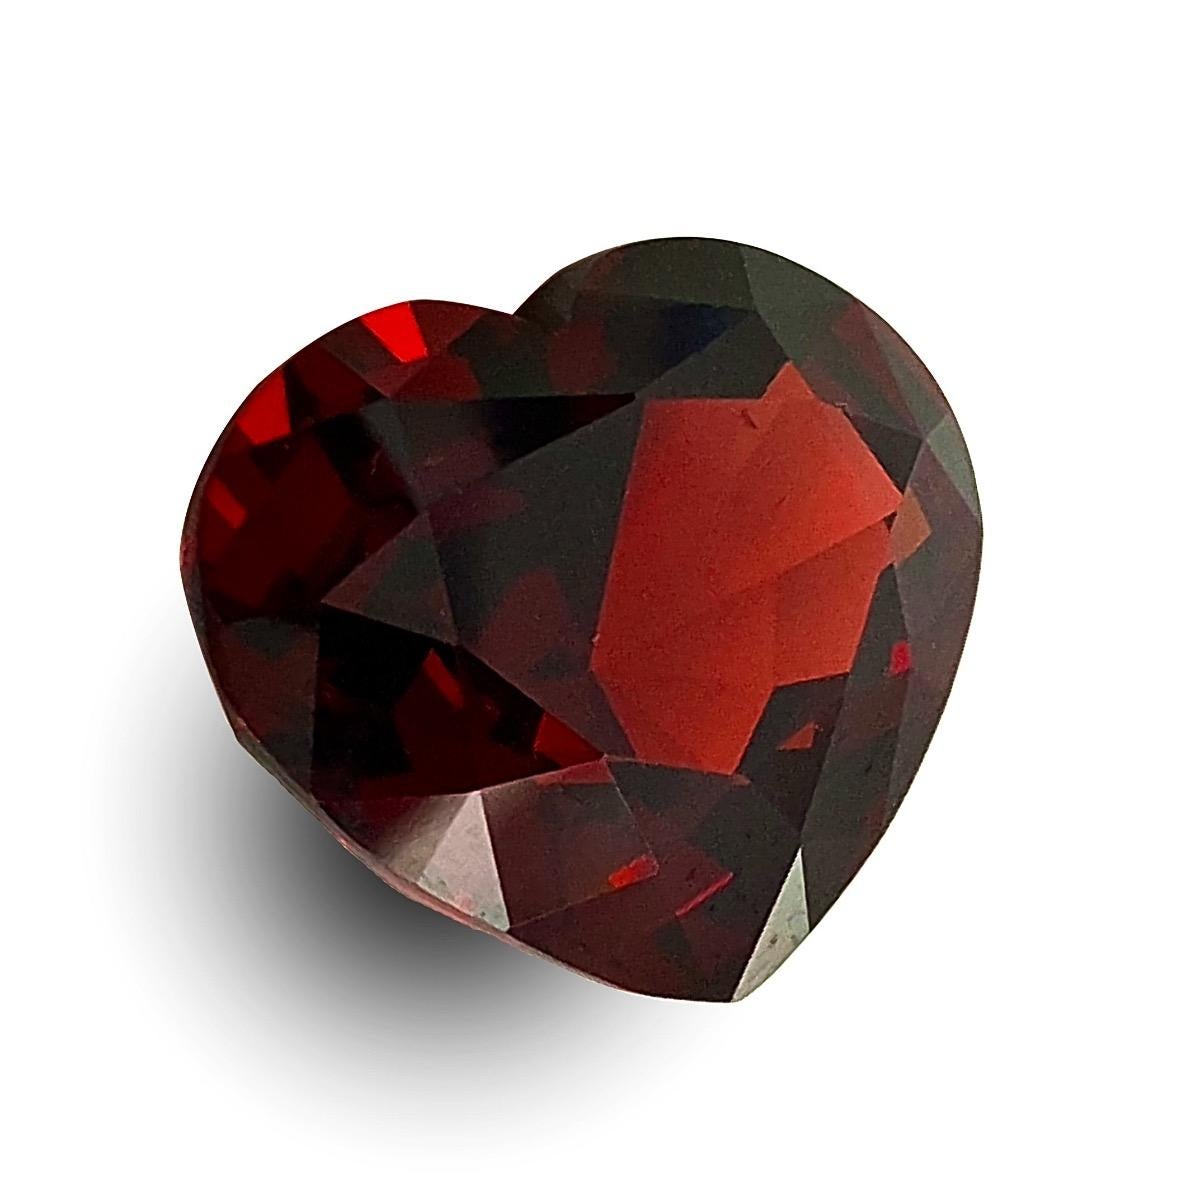 Fashioned as a heart, this rich red 19.42 carat natural Garnet is a well fashioned, eye clean gem. A statement piece, the gem’s flattering color will symbolize her personal style and sophistication perfect for an elegant bride.

Identification: